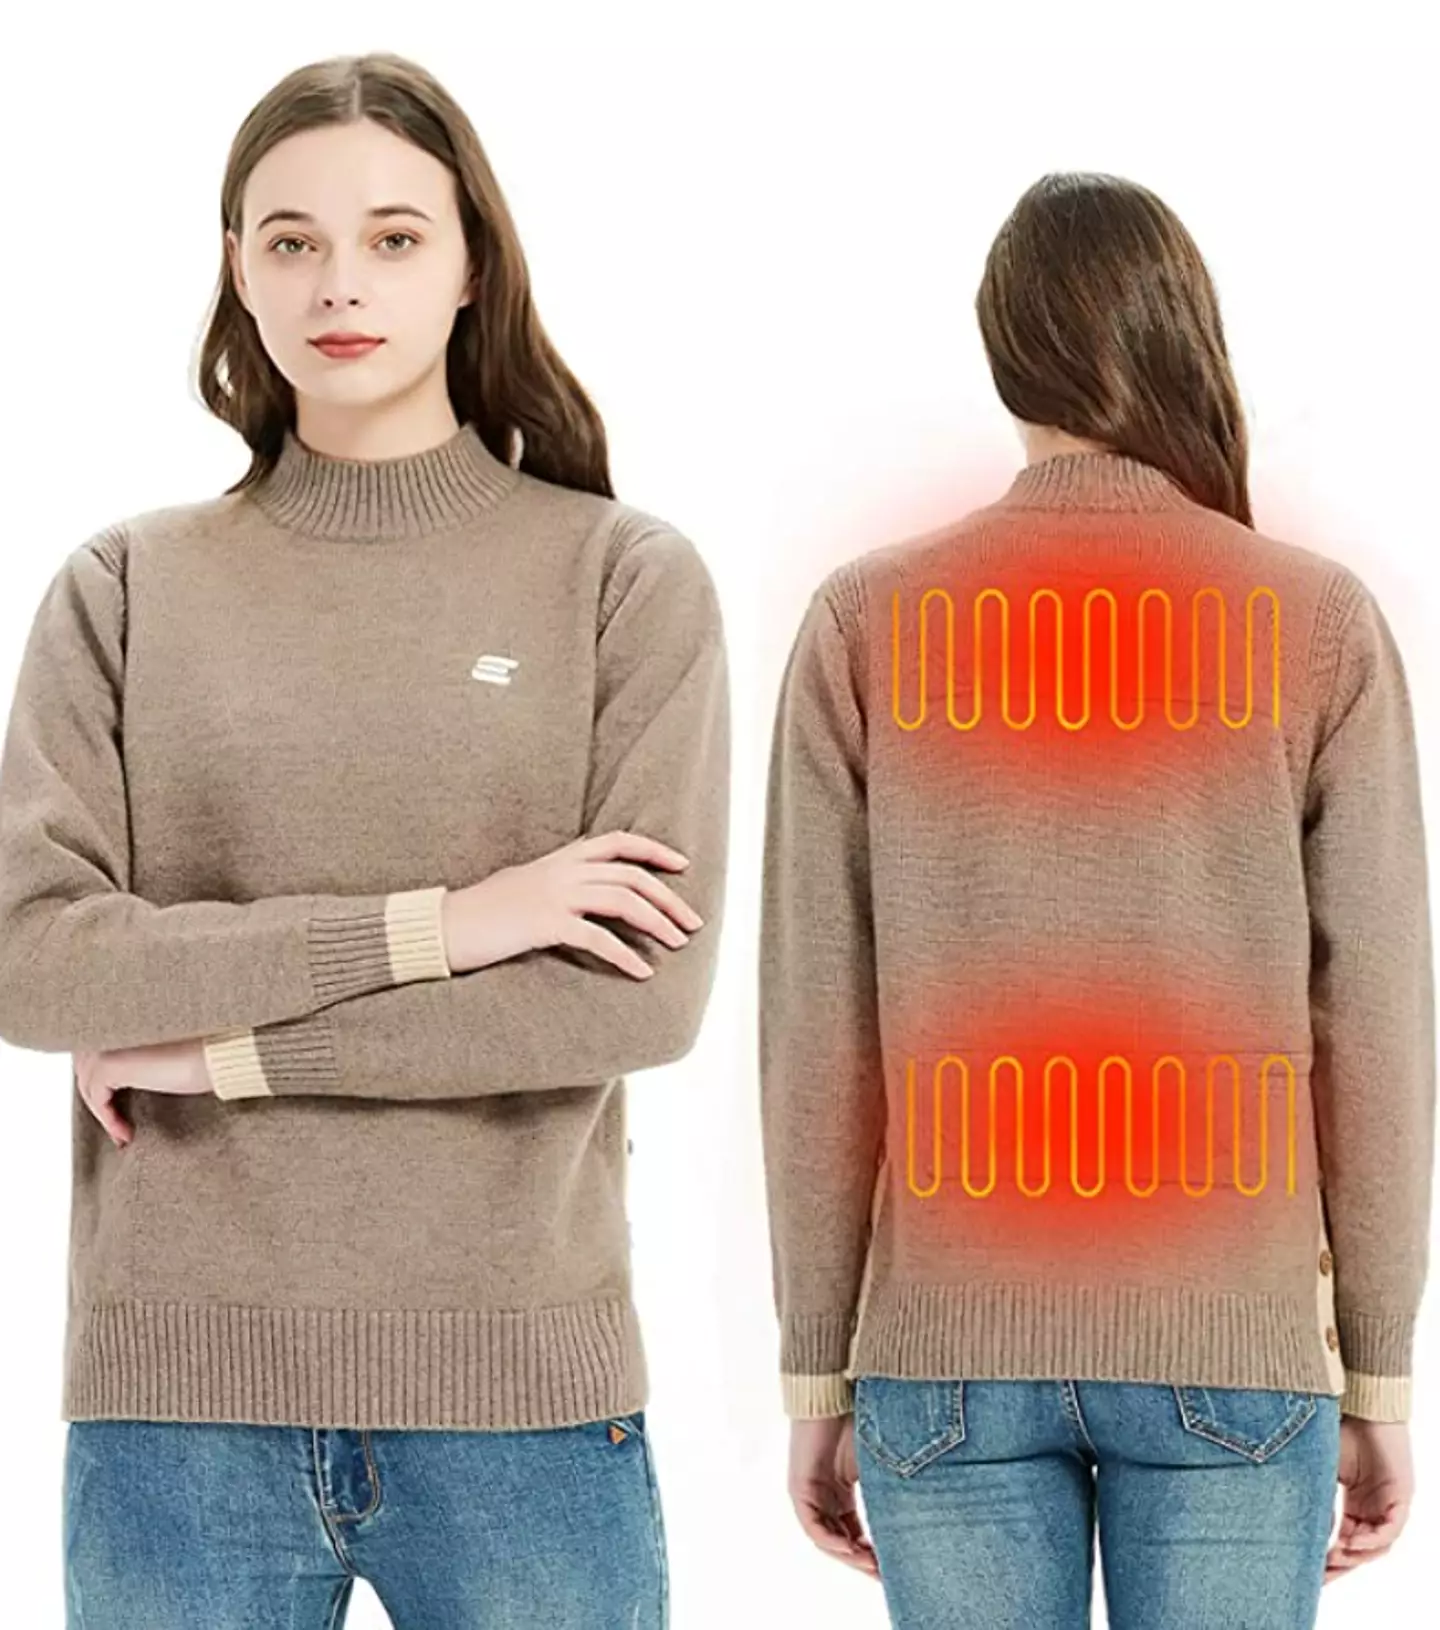 The heated jumper is available on Amazon (